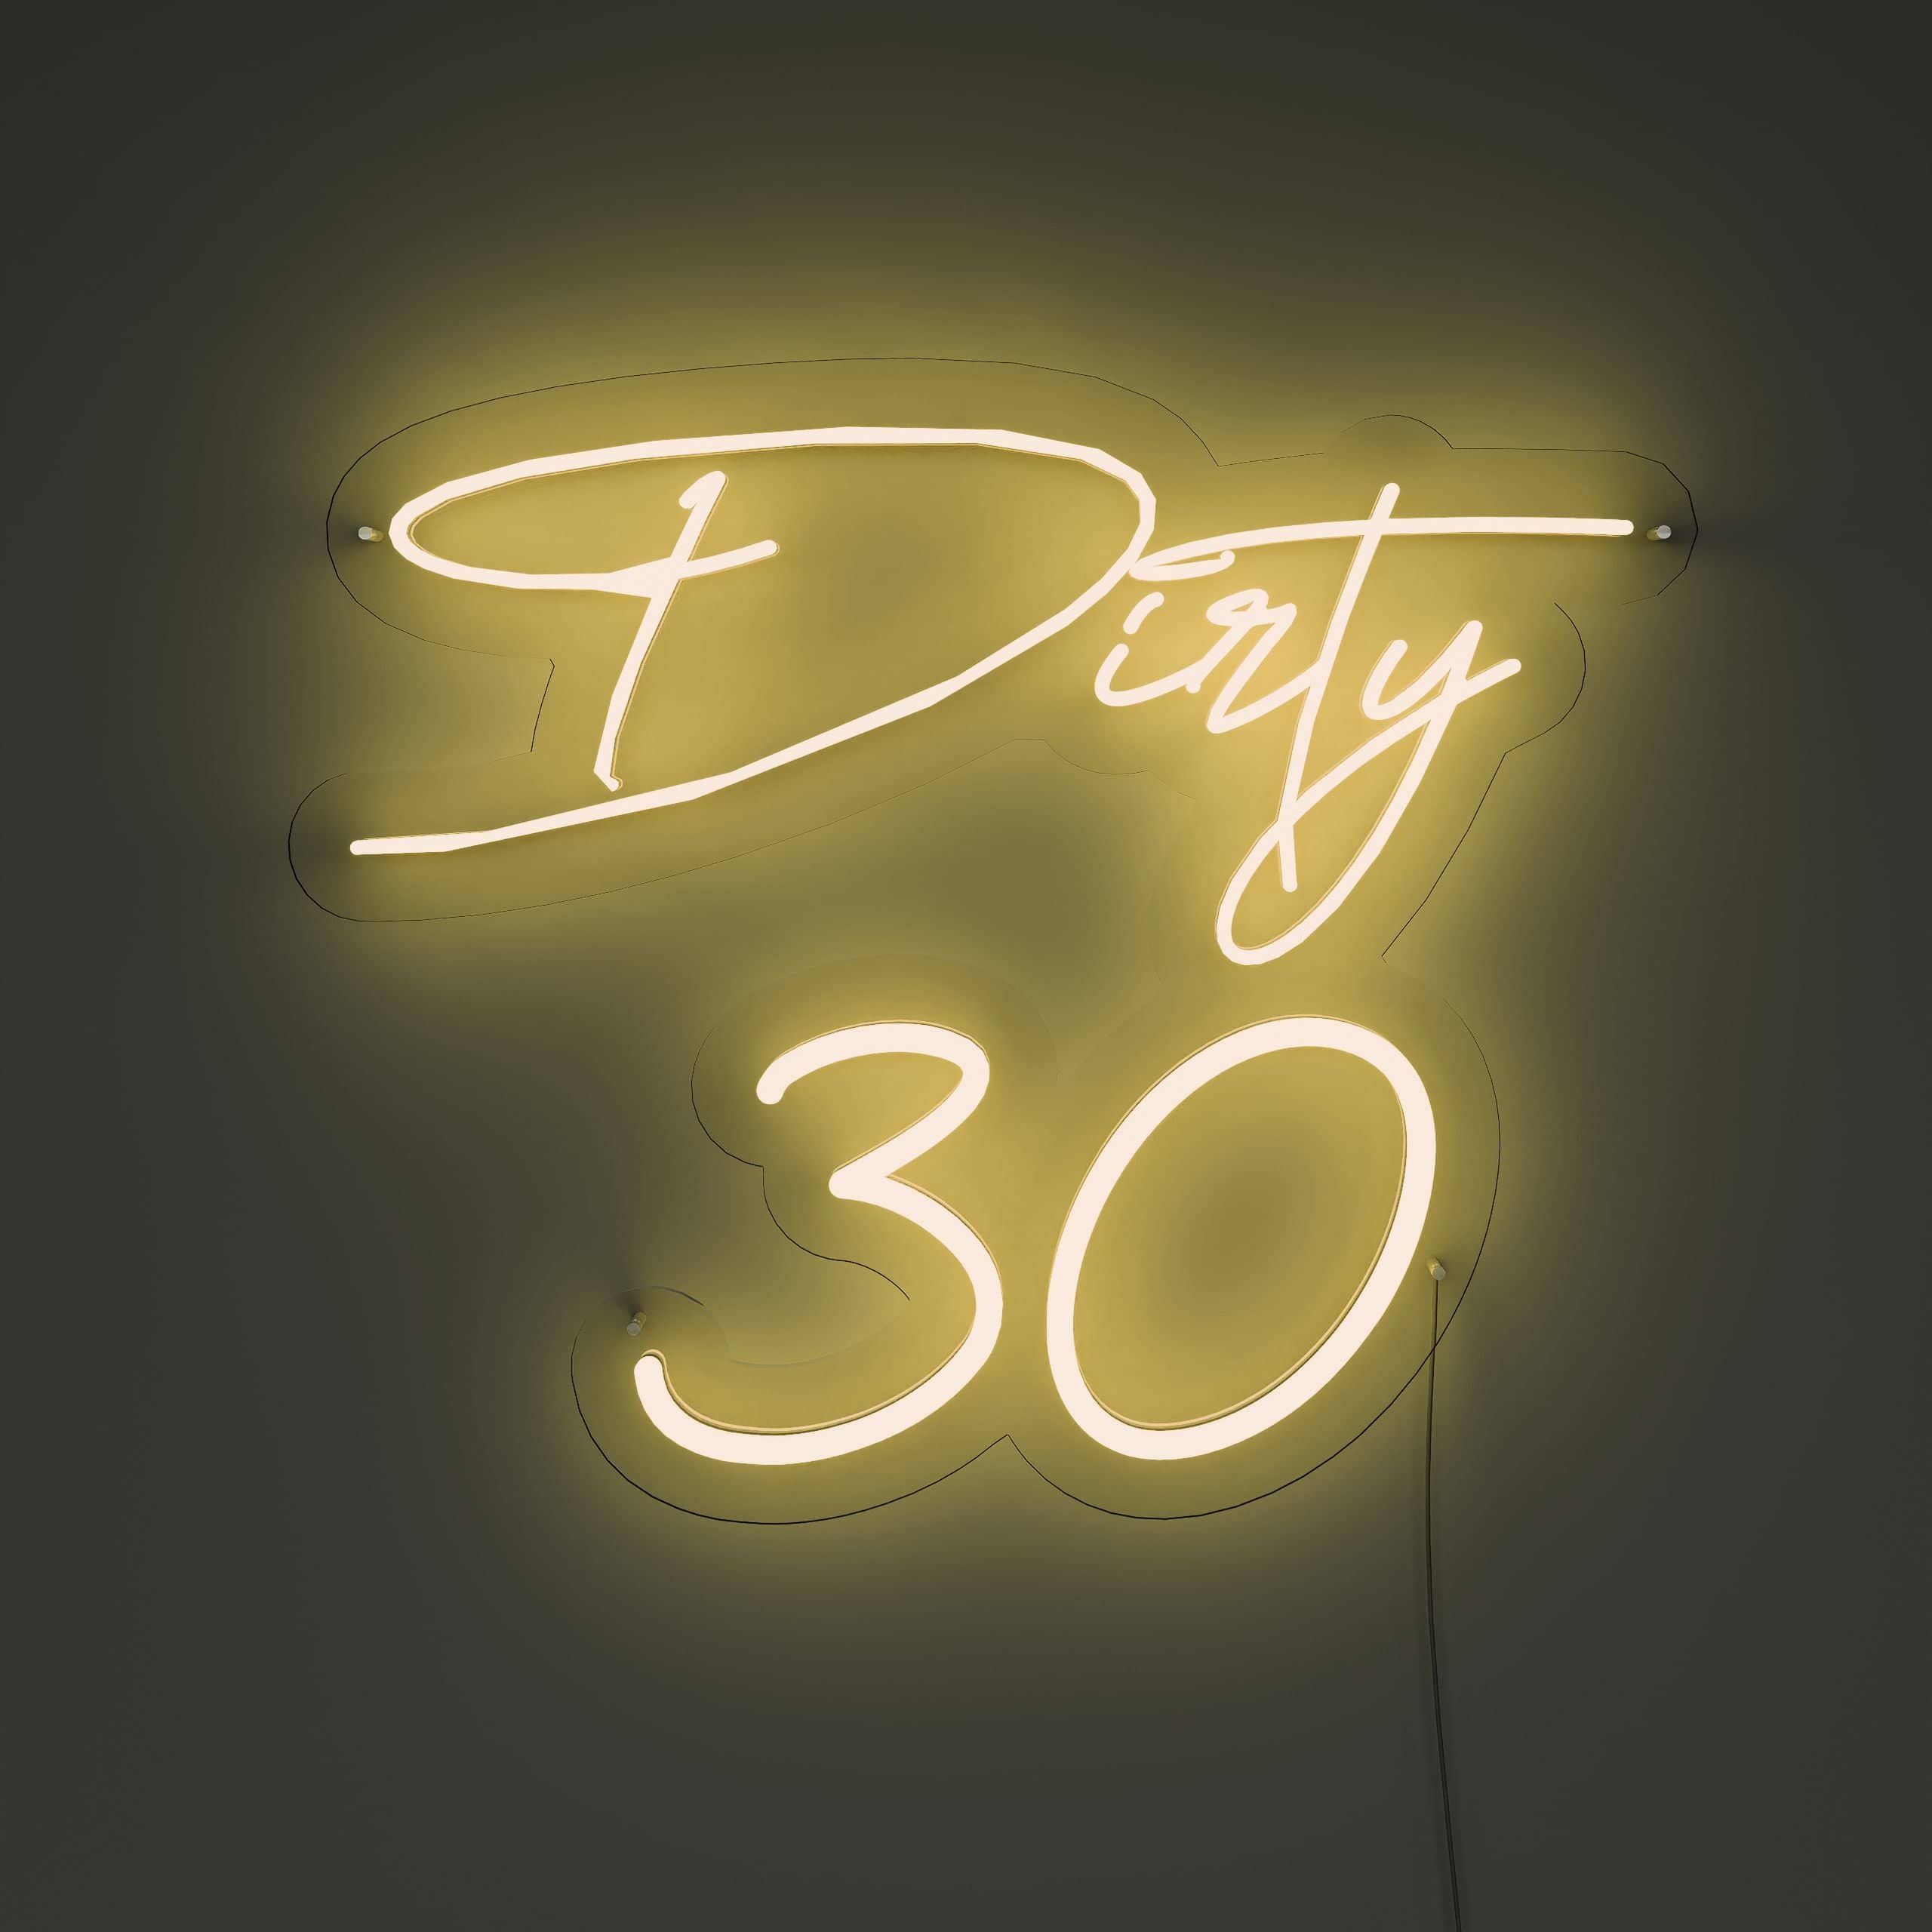 wishing-you-a-fantastic-dirty-30!-neon-sign-lite